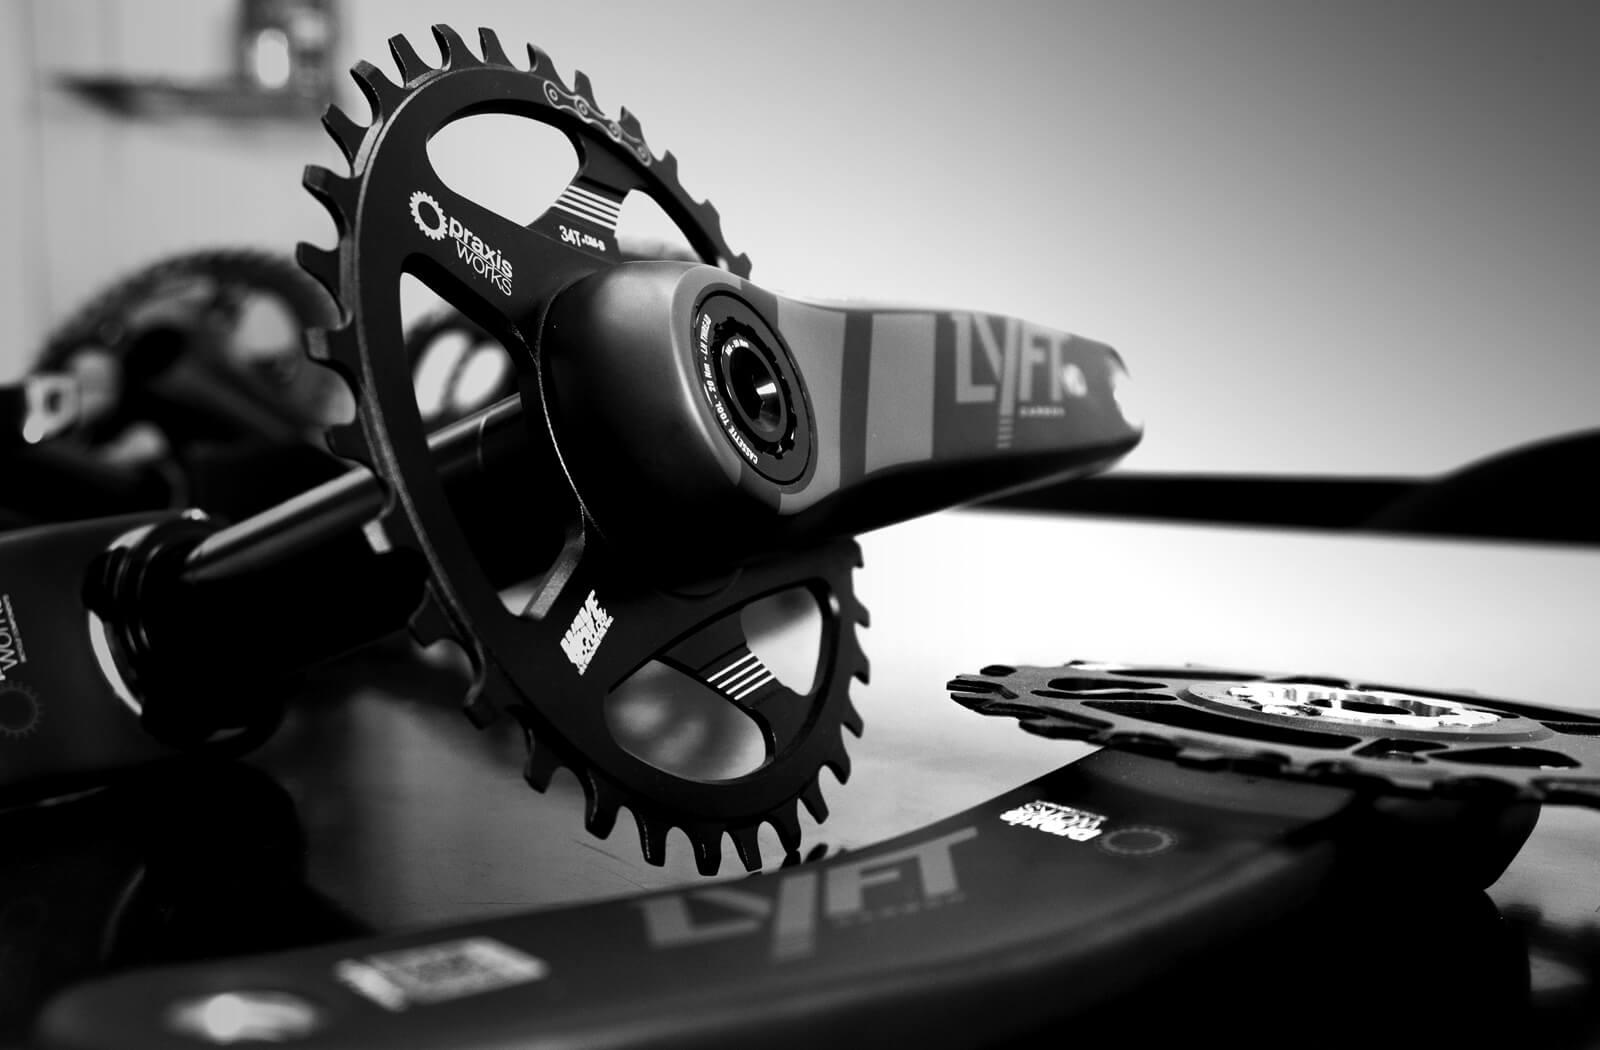 wobbly chainring